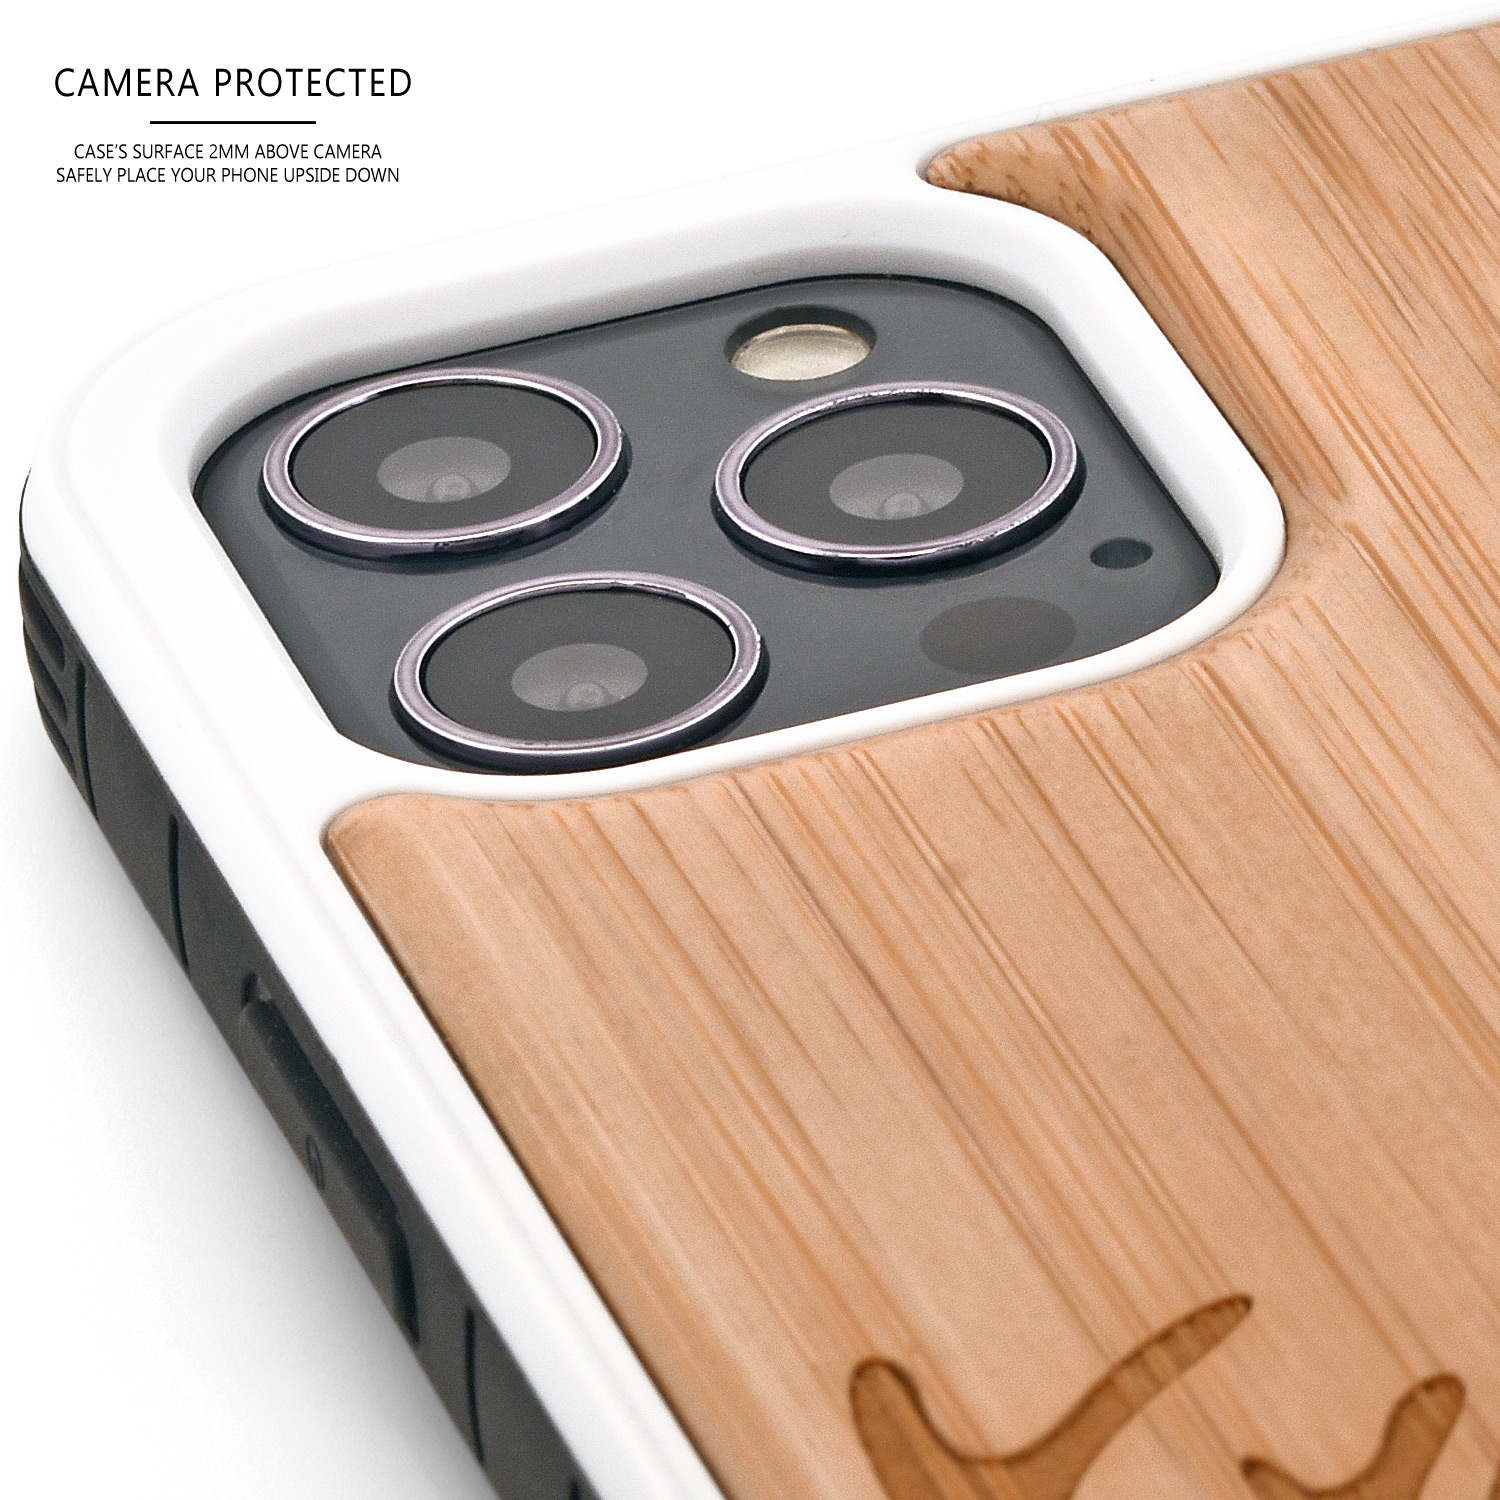 Bamboo wood phone case for iPhone 12 with deer print - camera